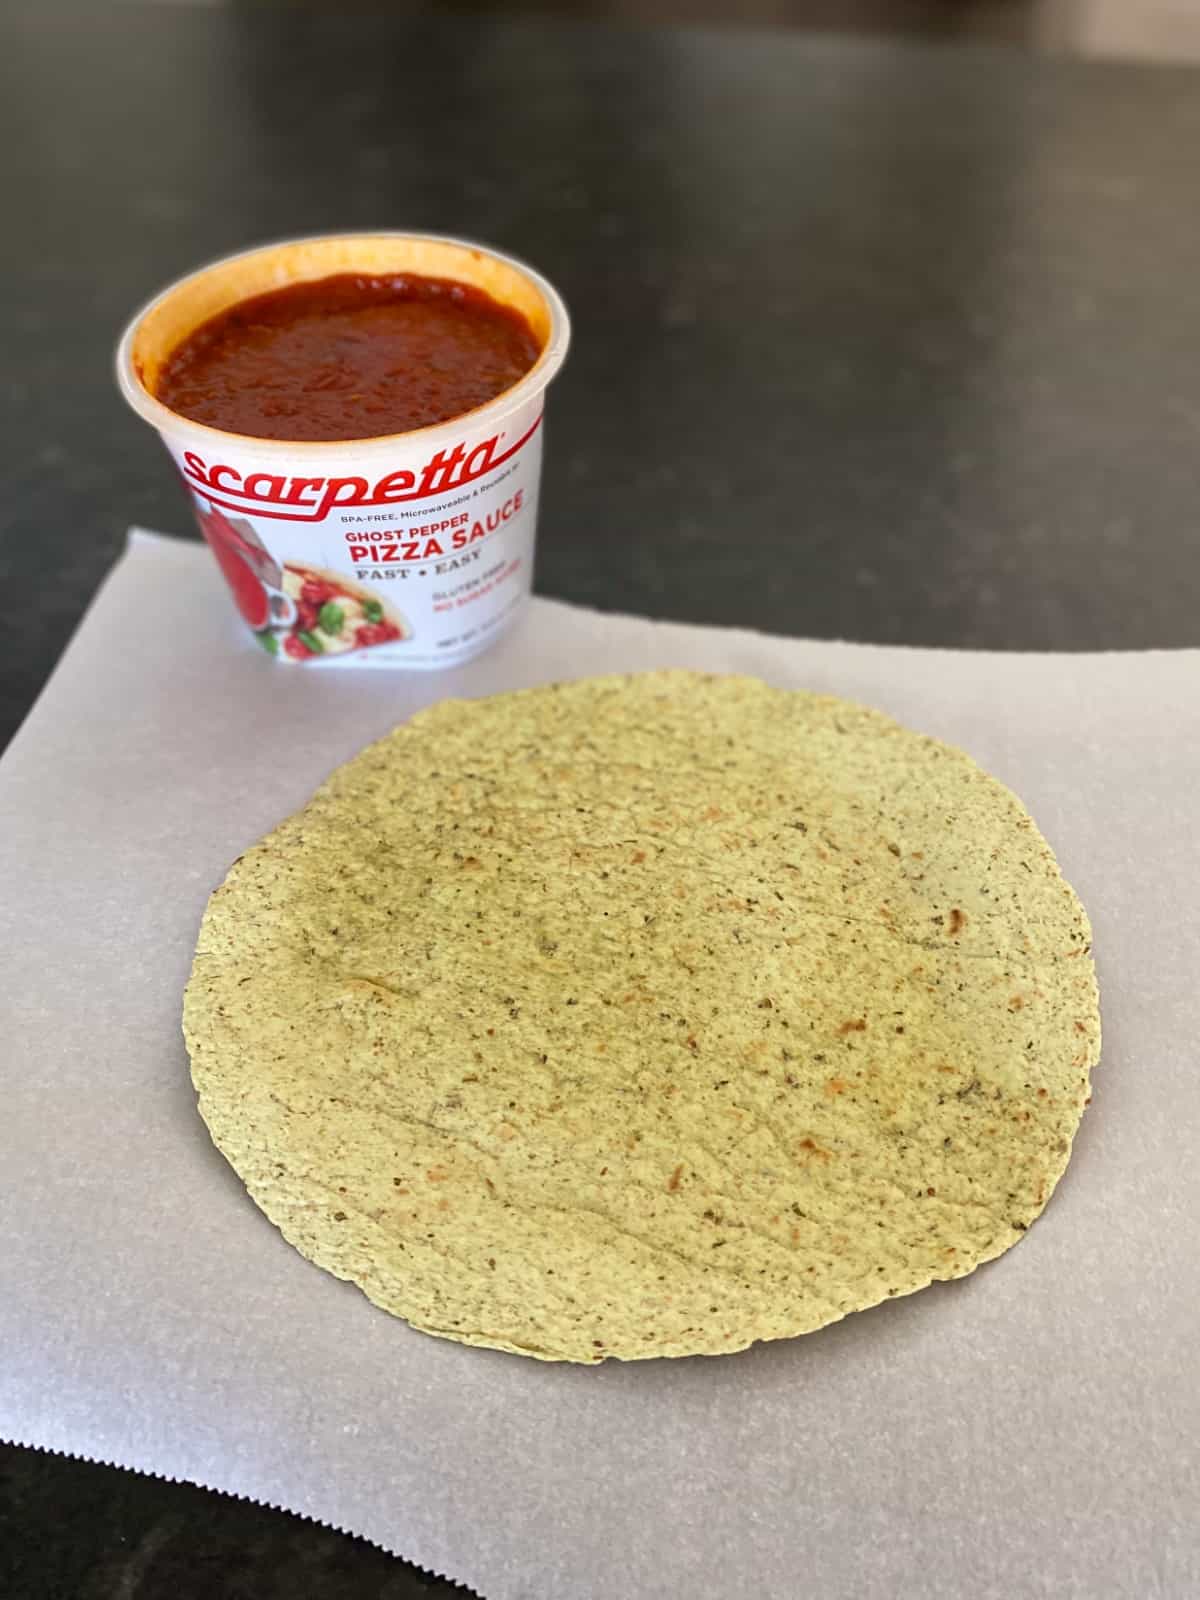 Pizza sauce container and crispy baked tortilla sitting on parchment paper.